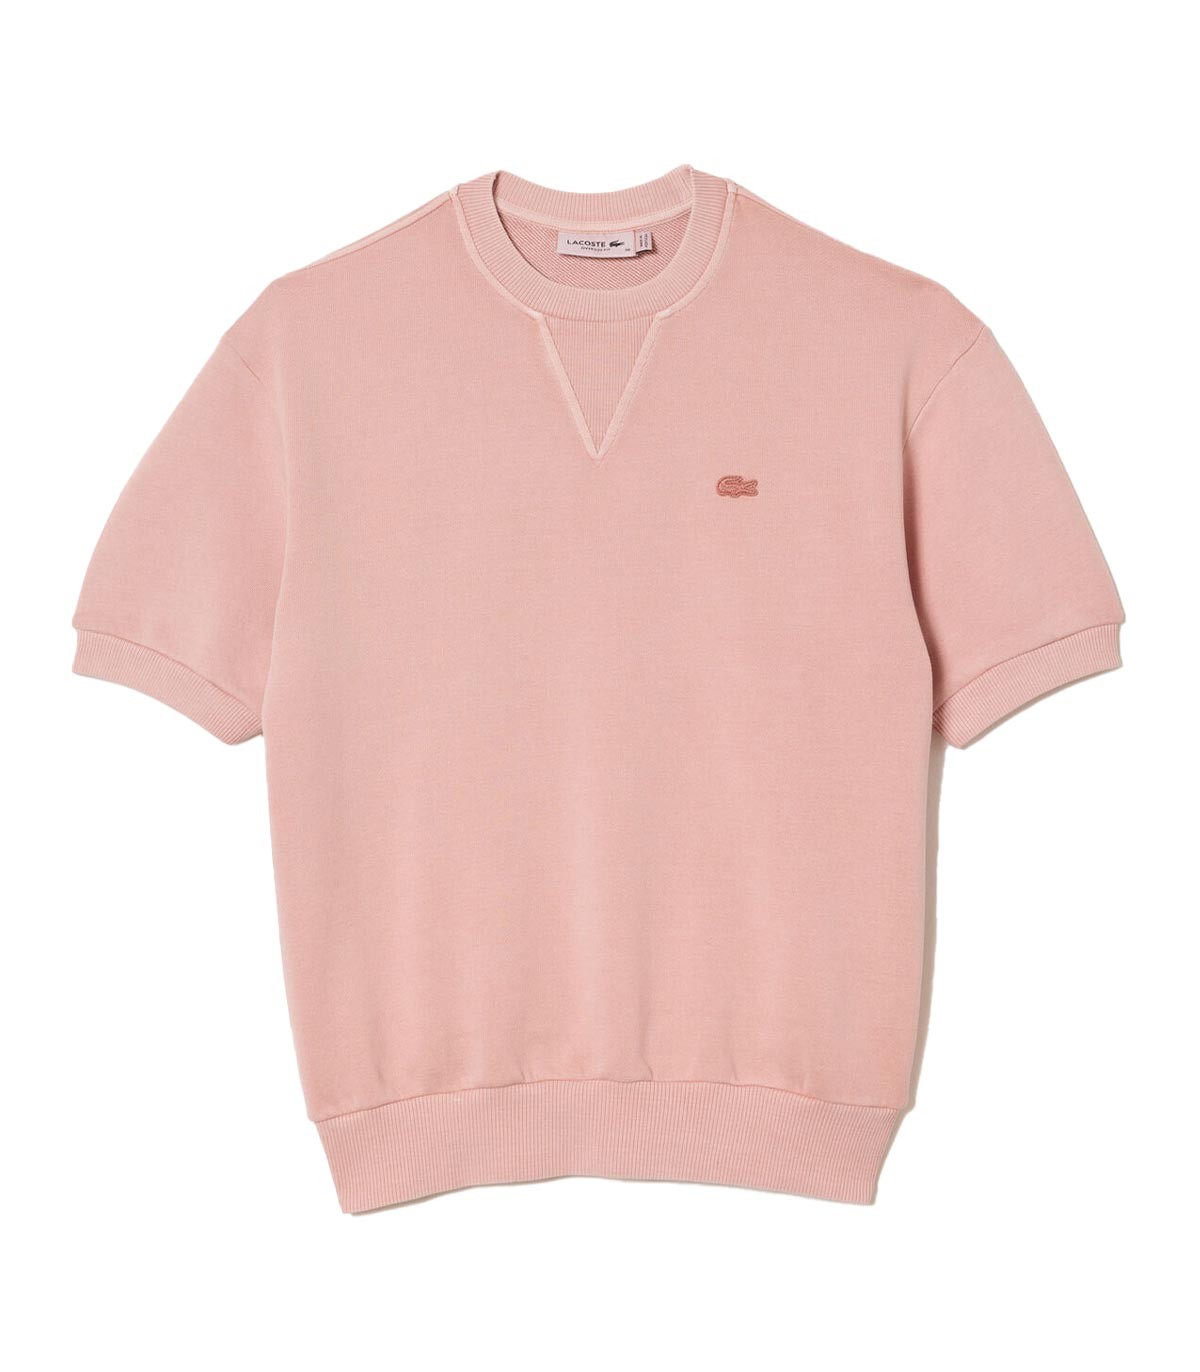 Lacoste - Camiseta Natural Dyed